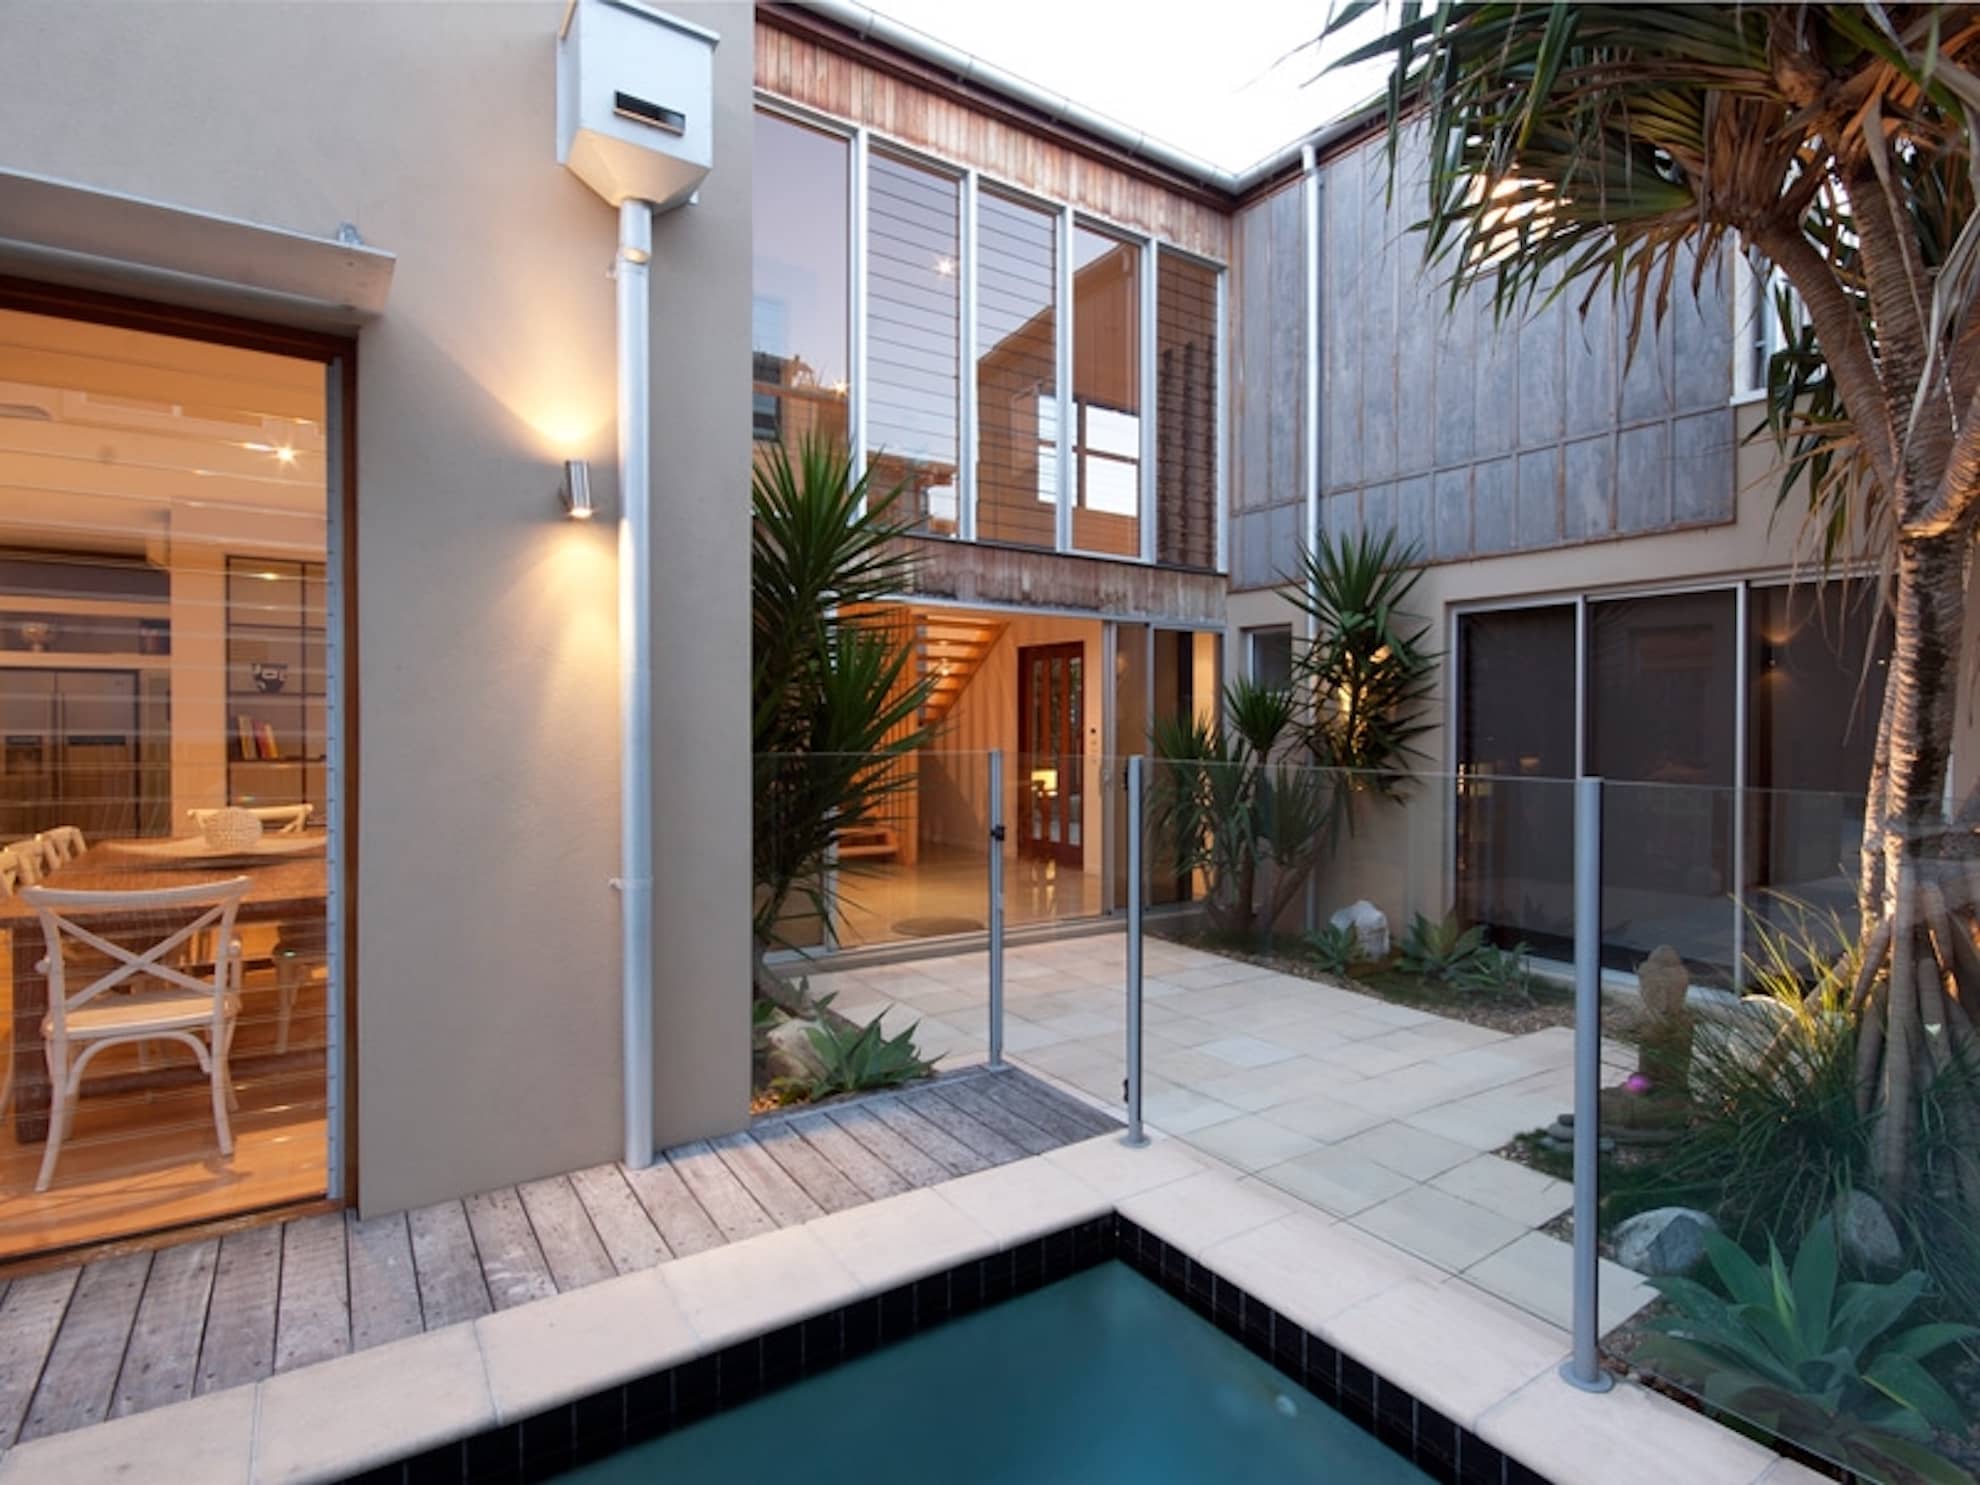 Boardrider Crescent project by mdesign, a building design practice that operates on the Sunshine Coast.